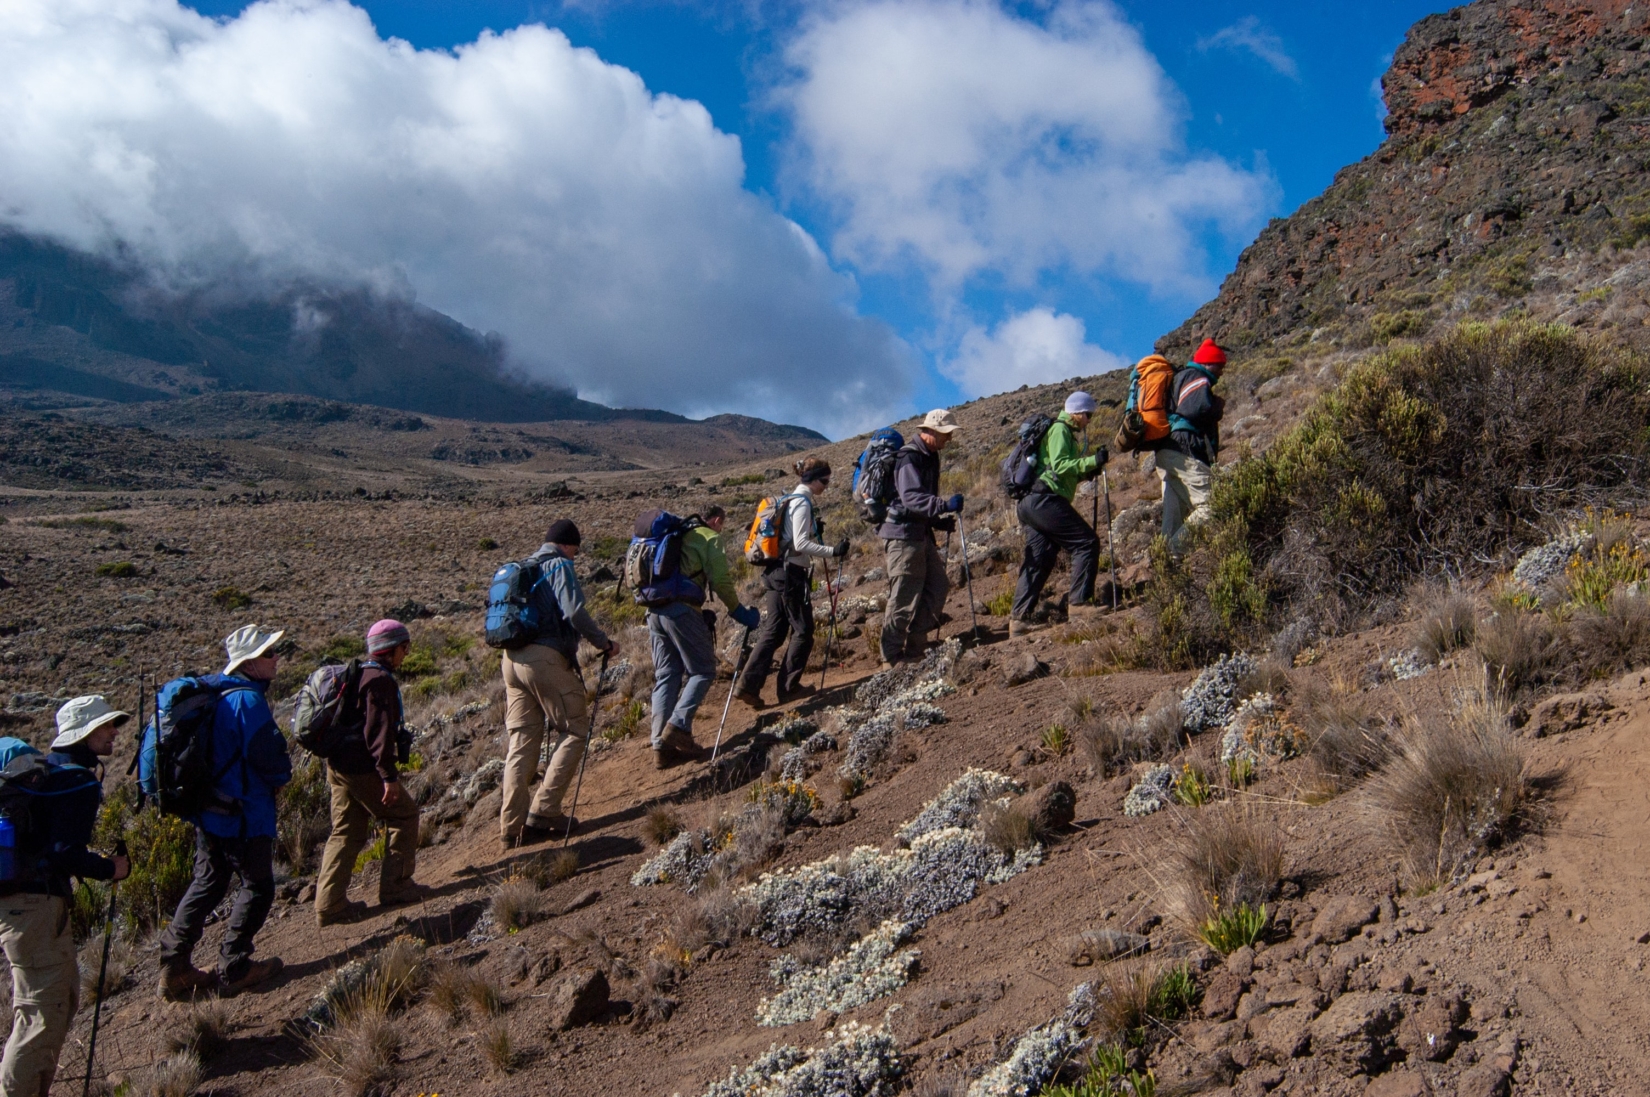 Line of hikers walking uphill in the mountains on Rongai route